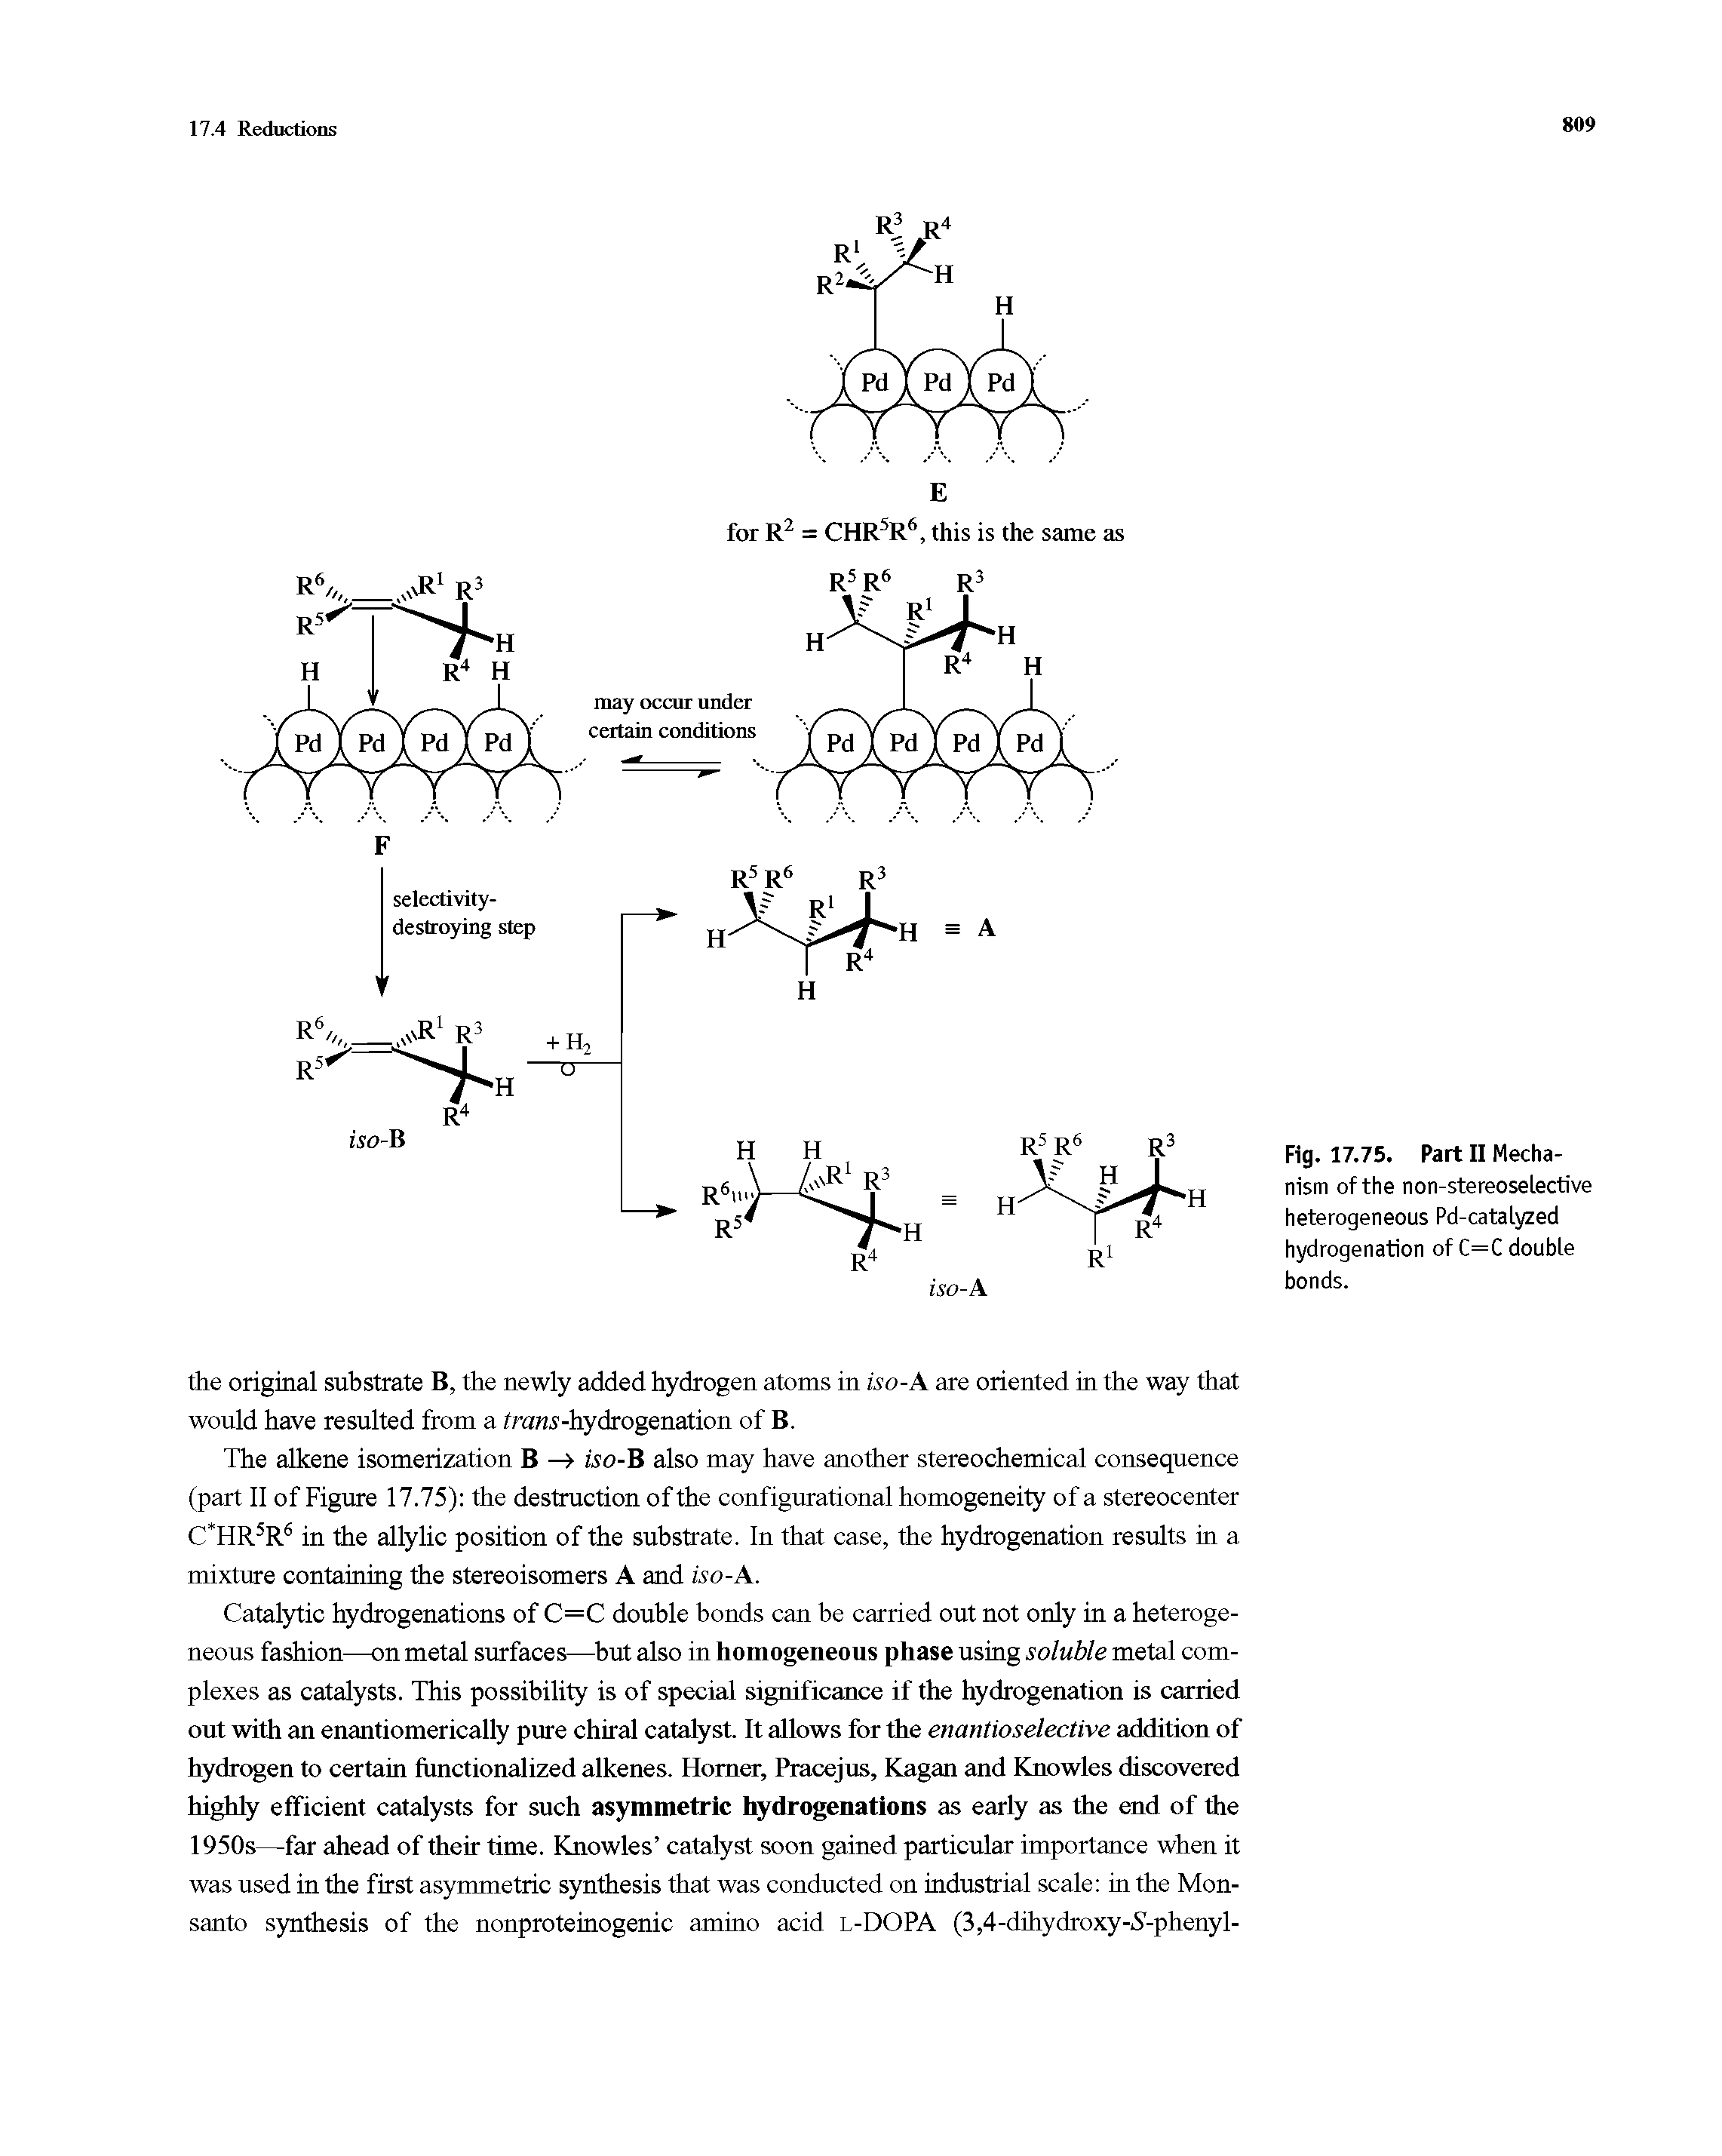 Fig. 17.75. Part II Mechanism of the non-stereoselective heterogeneous Pd-catalyzed hydrogenation of C=C double bonds.